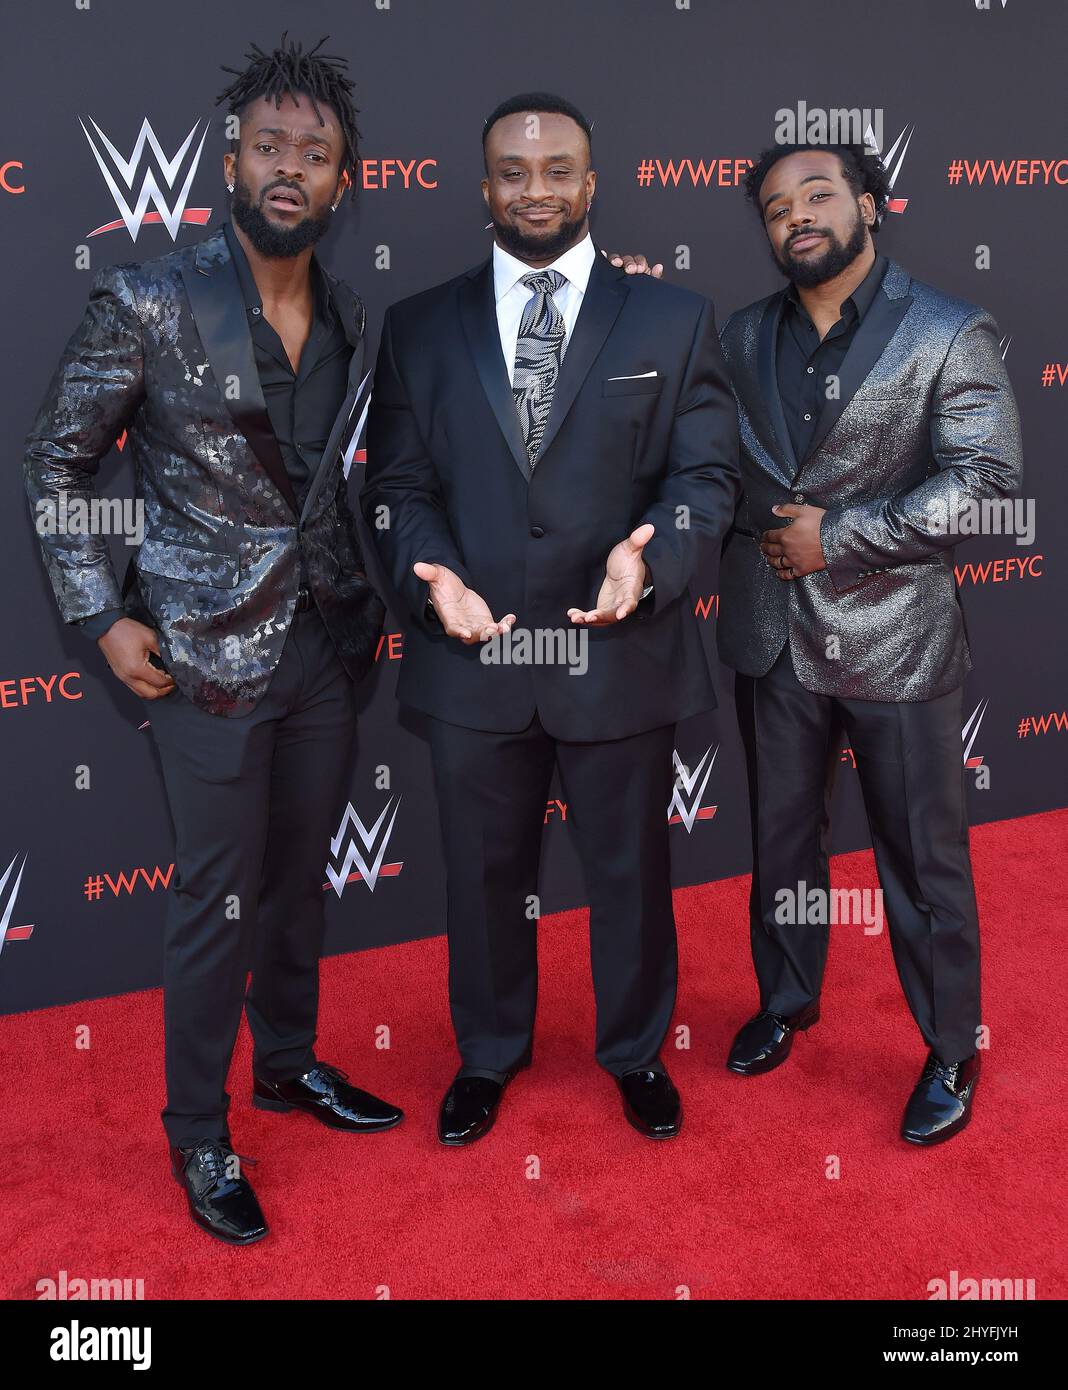 Xavier Woods, Big E and Kofi Kingston at the 'WWE' FYC Event event at TV Academy Saban Media Center on June 6, 2018 in North Hollywood, CA. Stock Photo